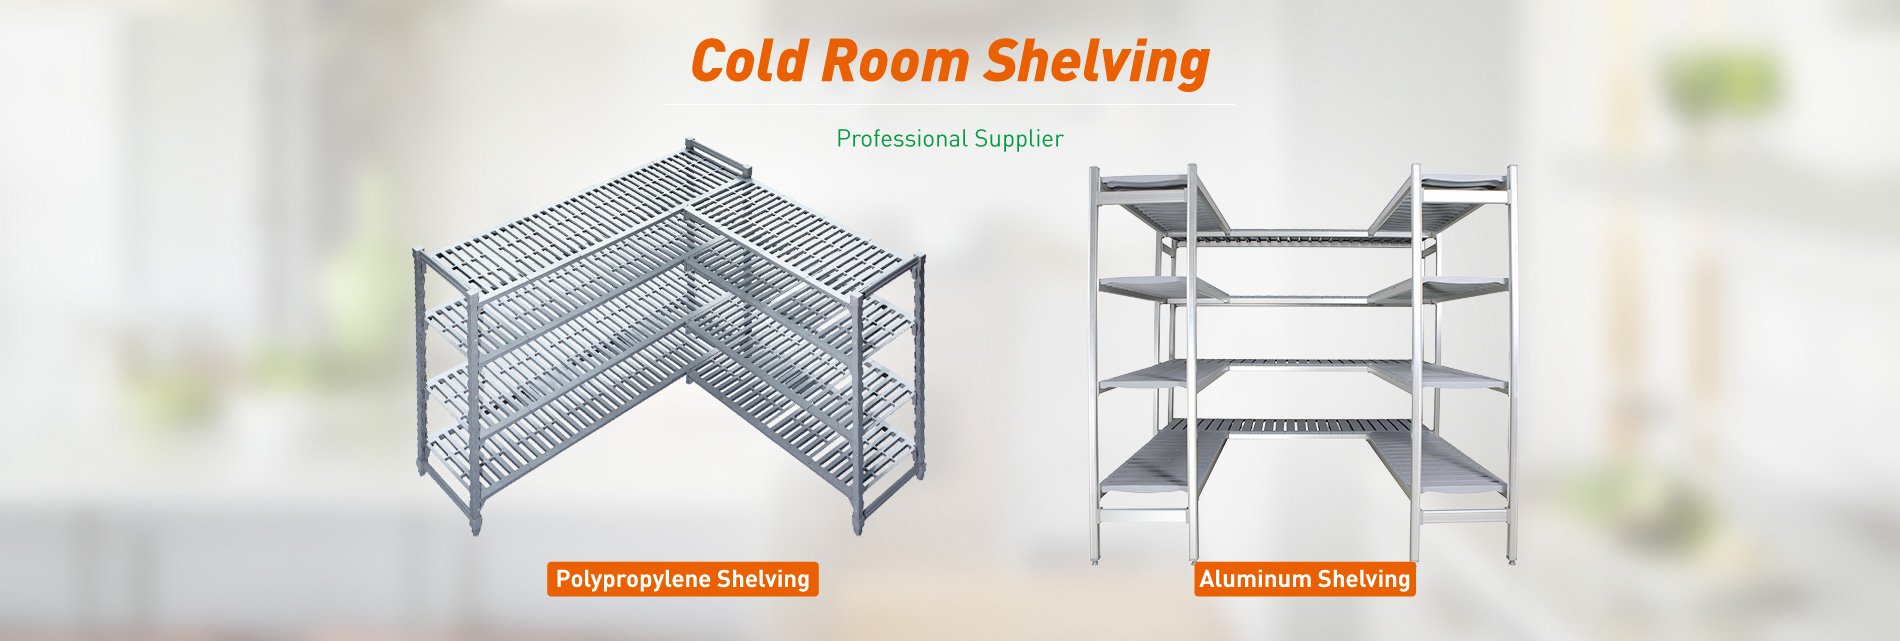 cold room shelving_画板 1